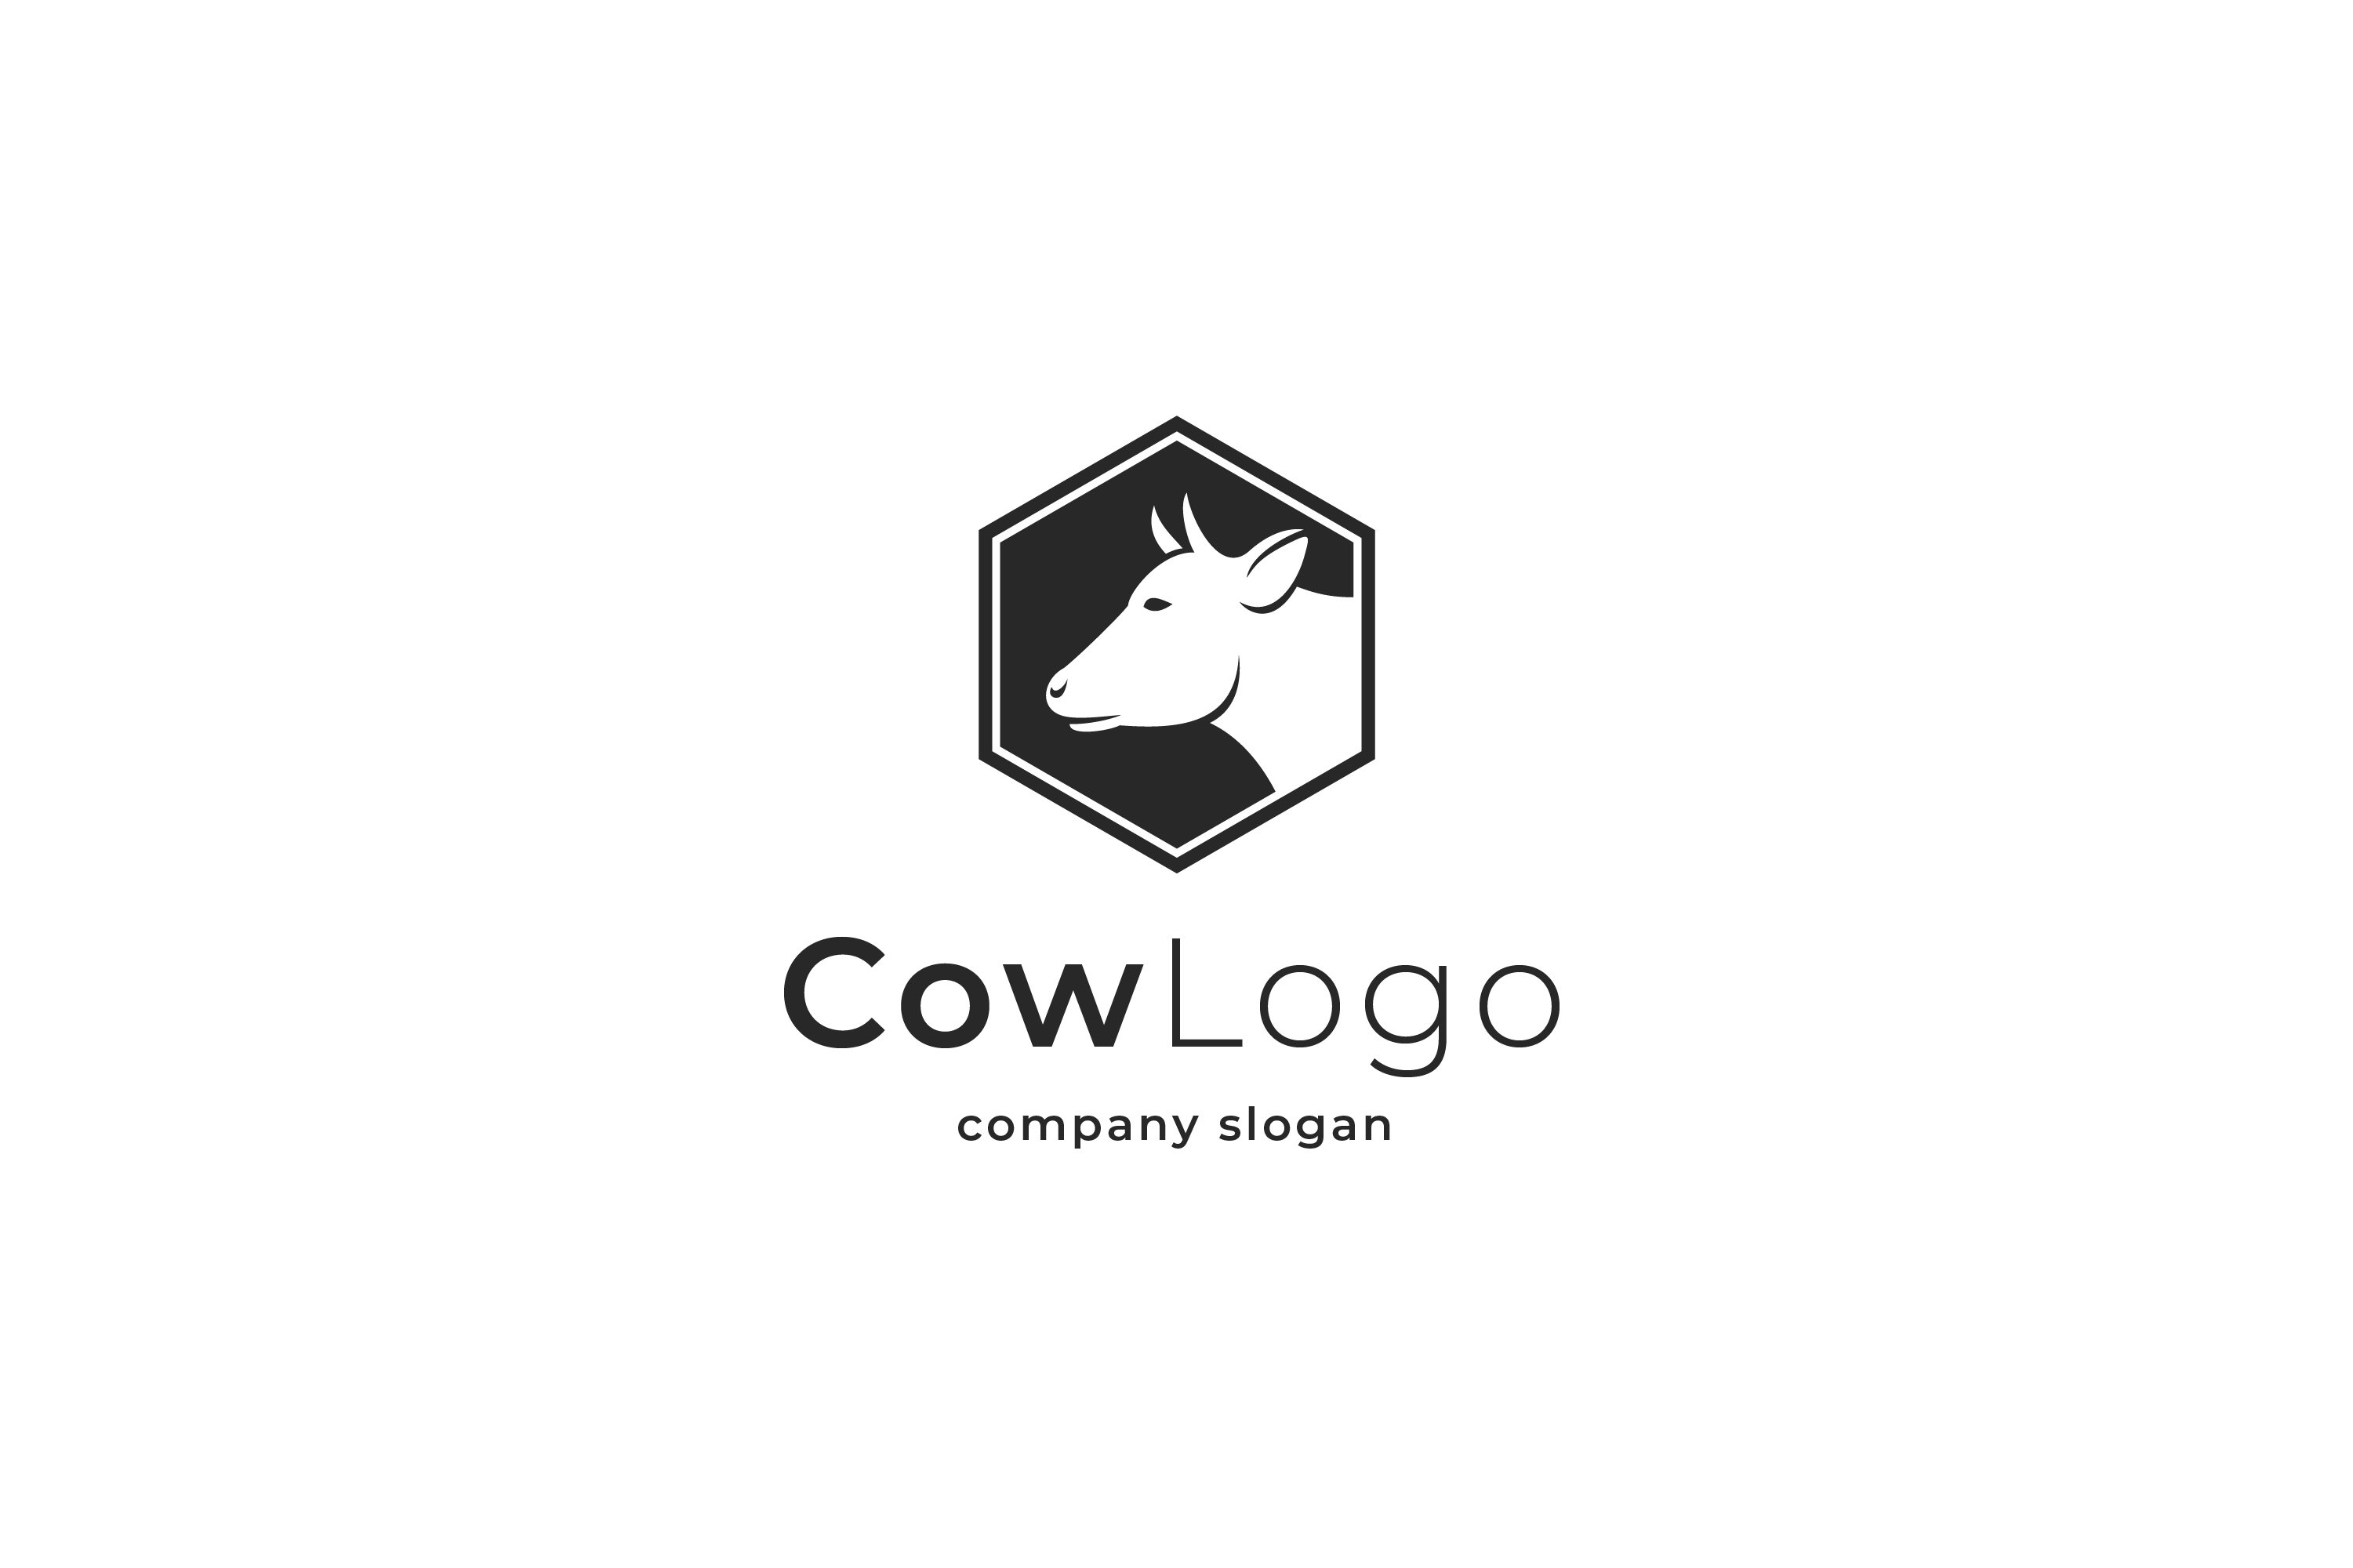 Minimalistic farm logo with a cow in a BW style.